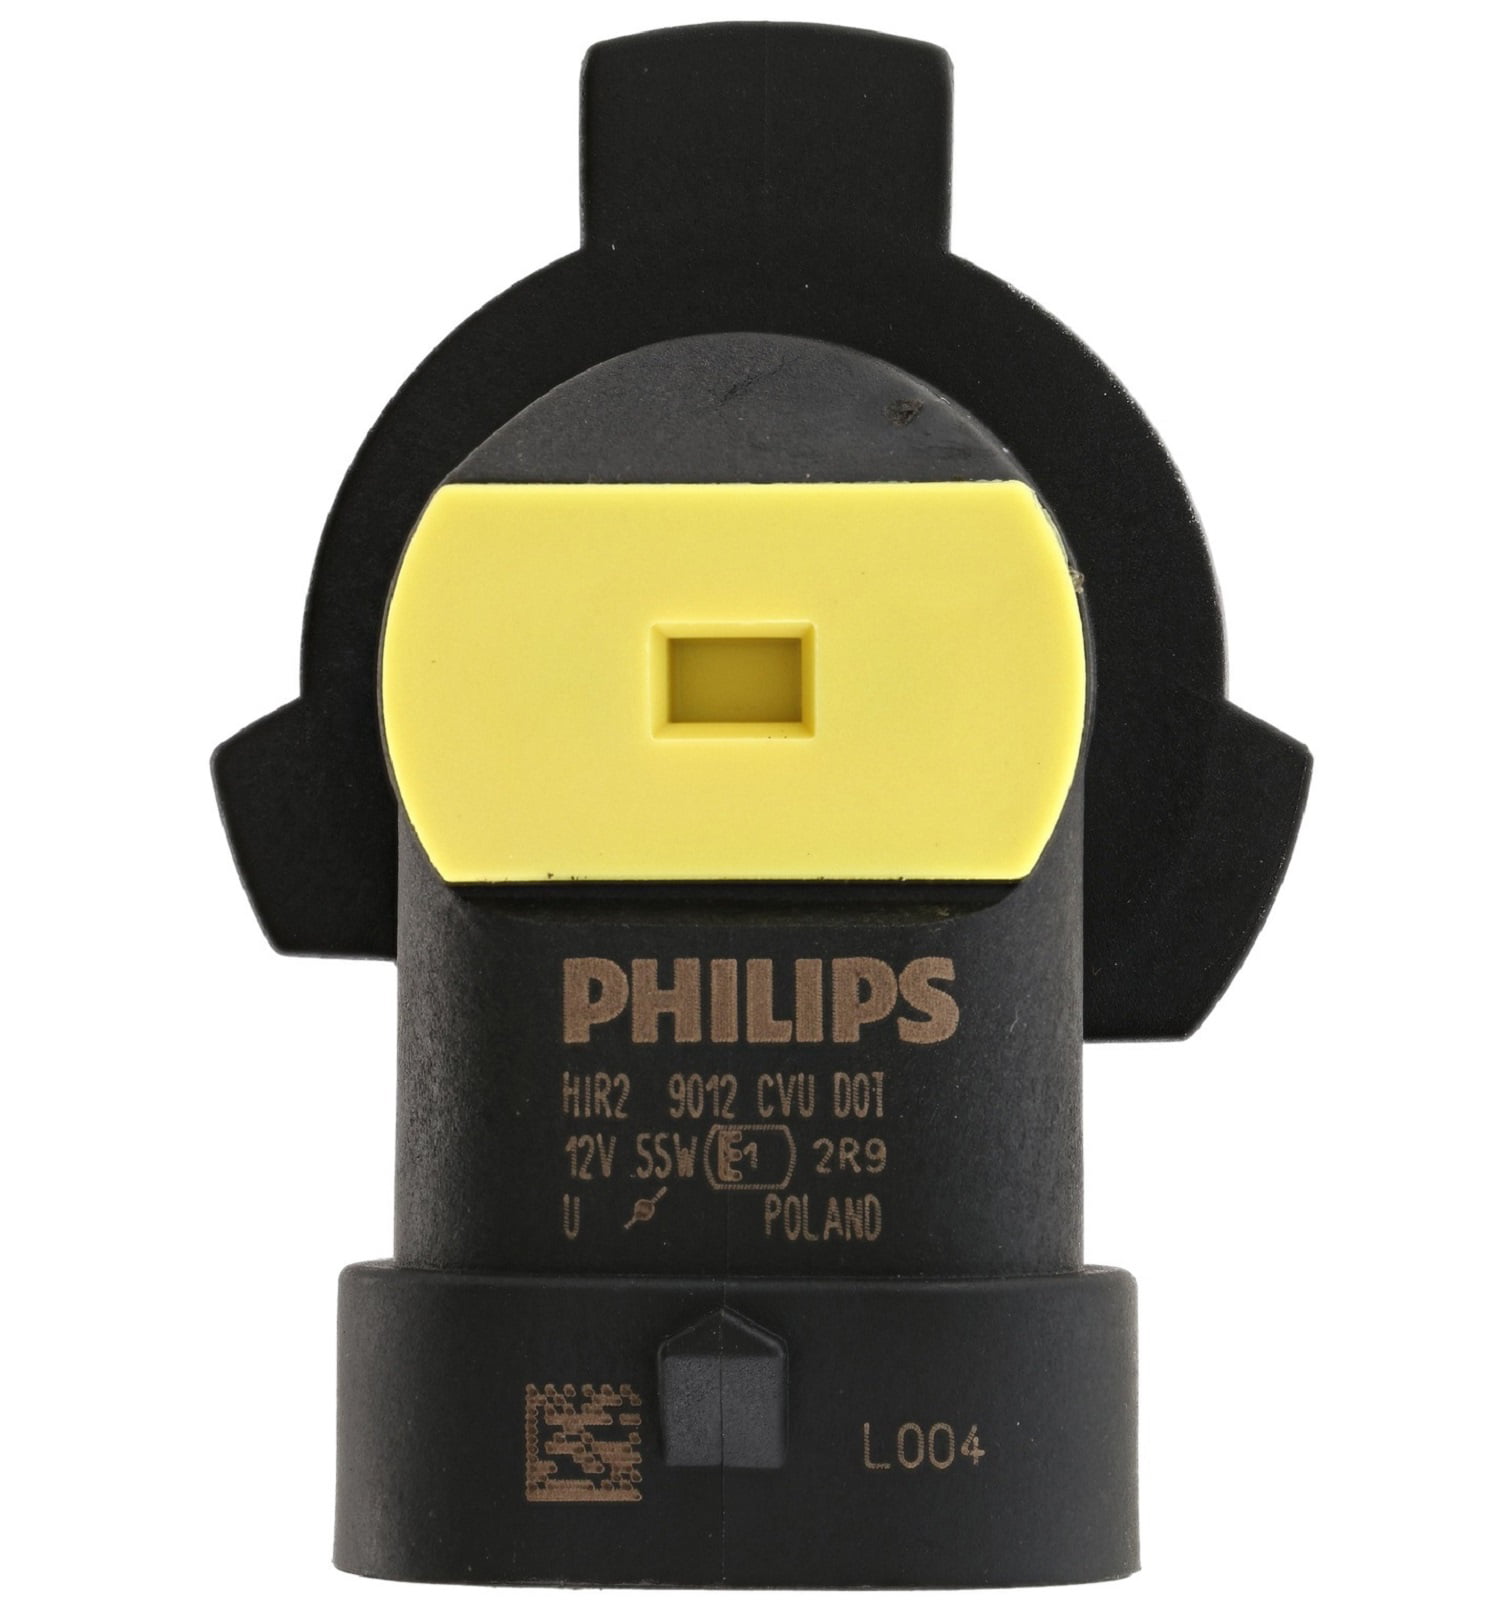 Ampoule HIR2, 12v 55w, LongLife EcoVision - Philips